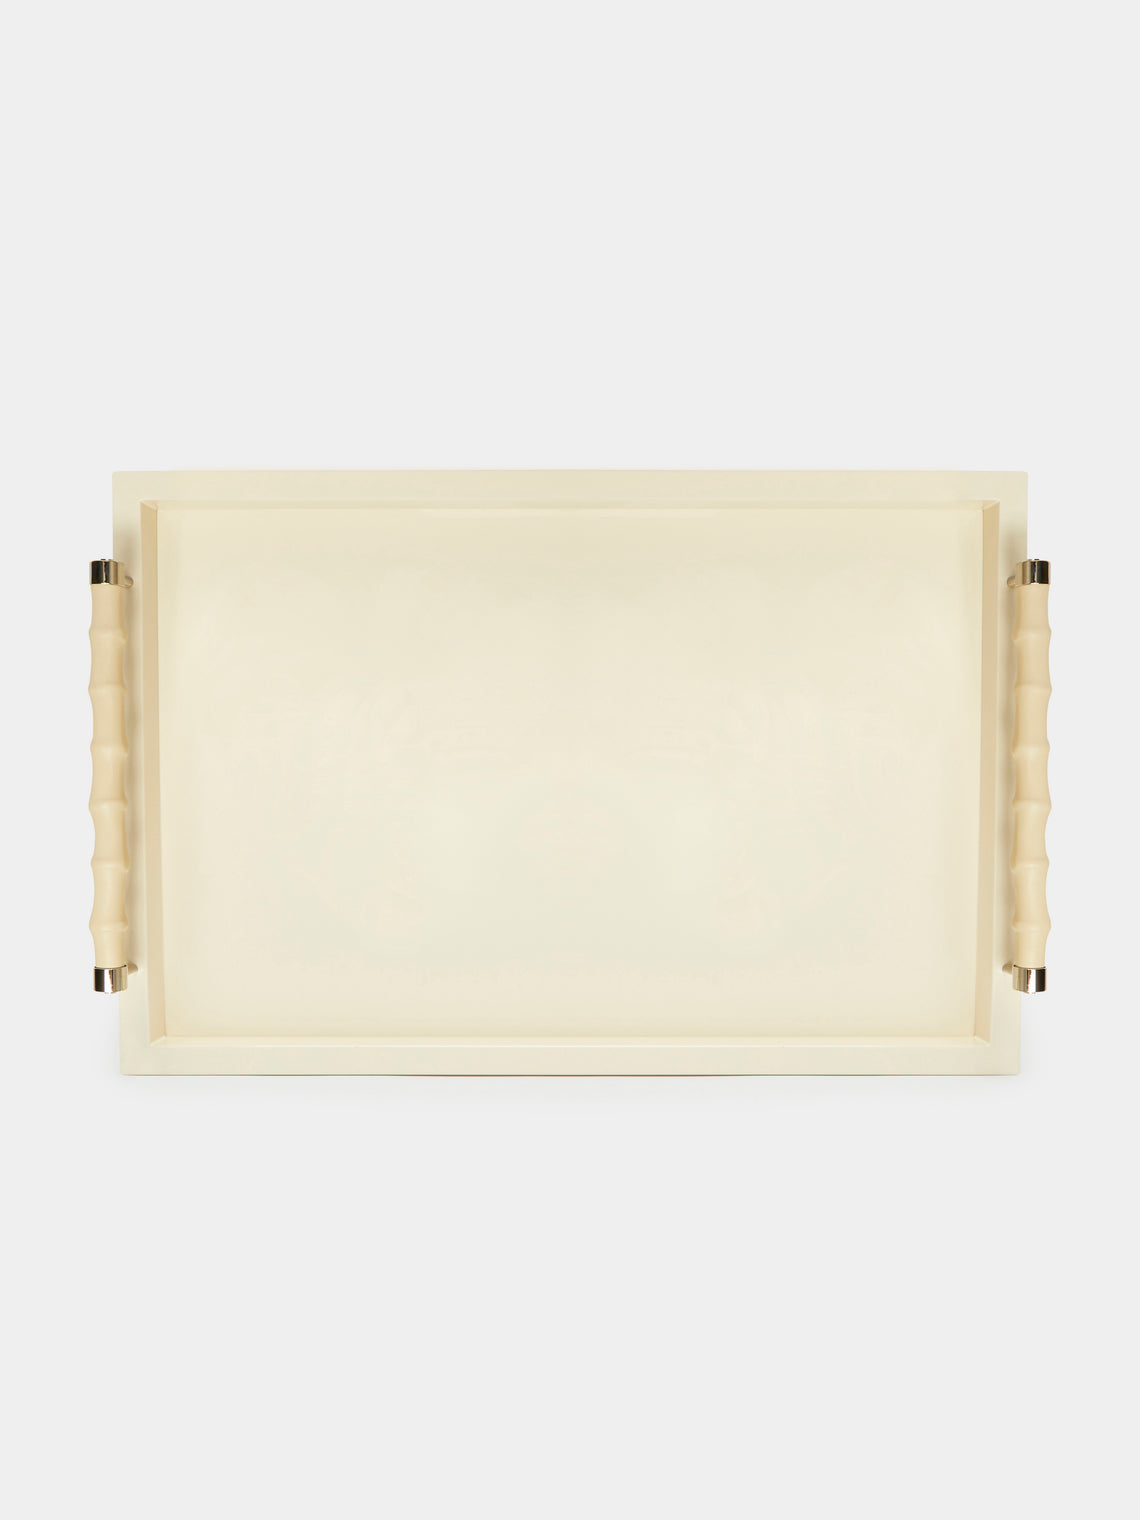 Riviere - Lacquered Leather Tray - Cream - ABASK